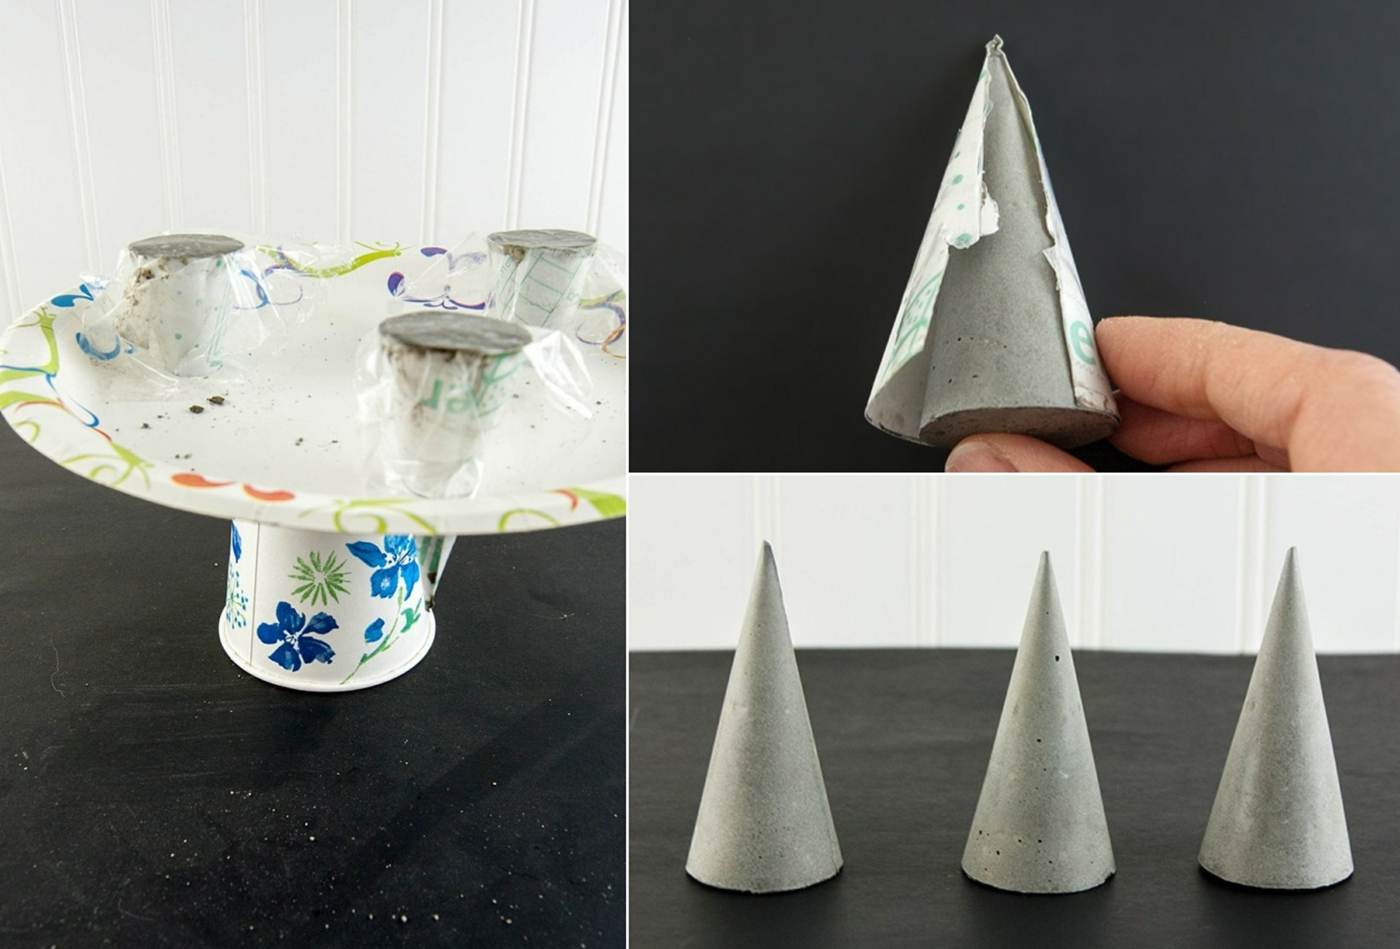 The cone ring holder is quick and easy to make